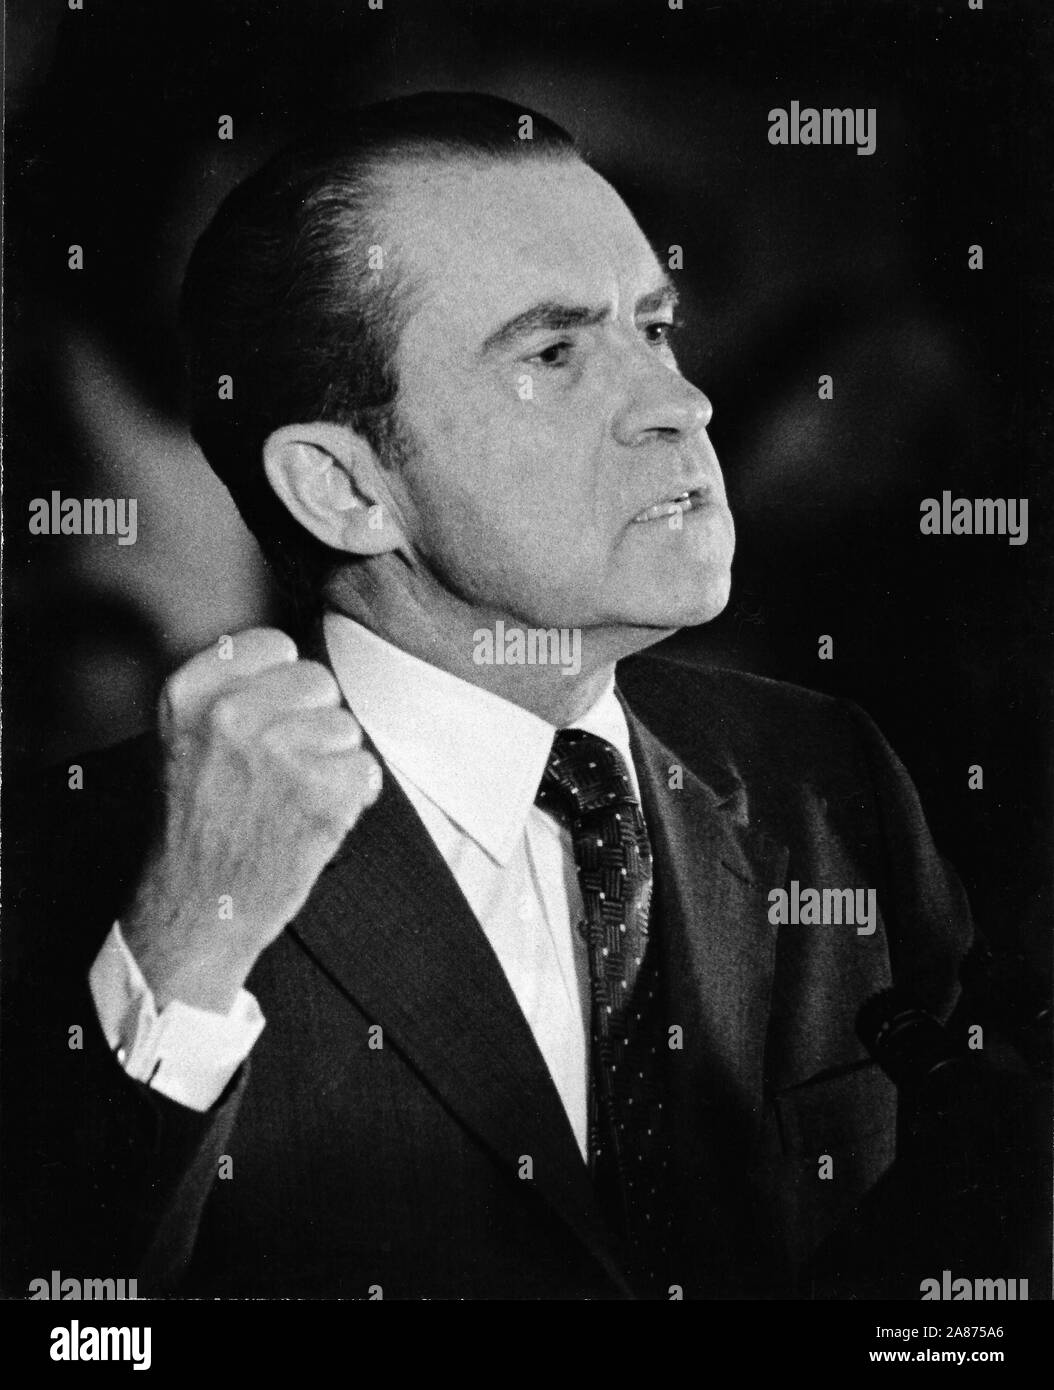 Richard Milhous Nixon (January 9, 1913 – April 22, 1994) was an American politician who served as the 37th president of the United States from 1969 until his resignation in 1974. The only president to resign from the office, he previously served as the nation's 36th vice president from 1953 to 1961, and as a representative and senator from California.  Nixon was born in Yorba Linda, California. He completed his undergraduate studies at Whittier College, then graduated from Duke University School of Law in 1937 and returned to California to practice law Stock Photo